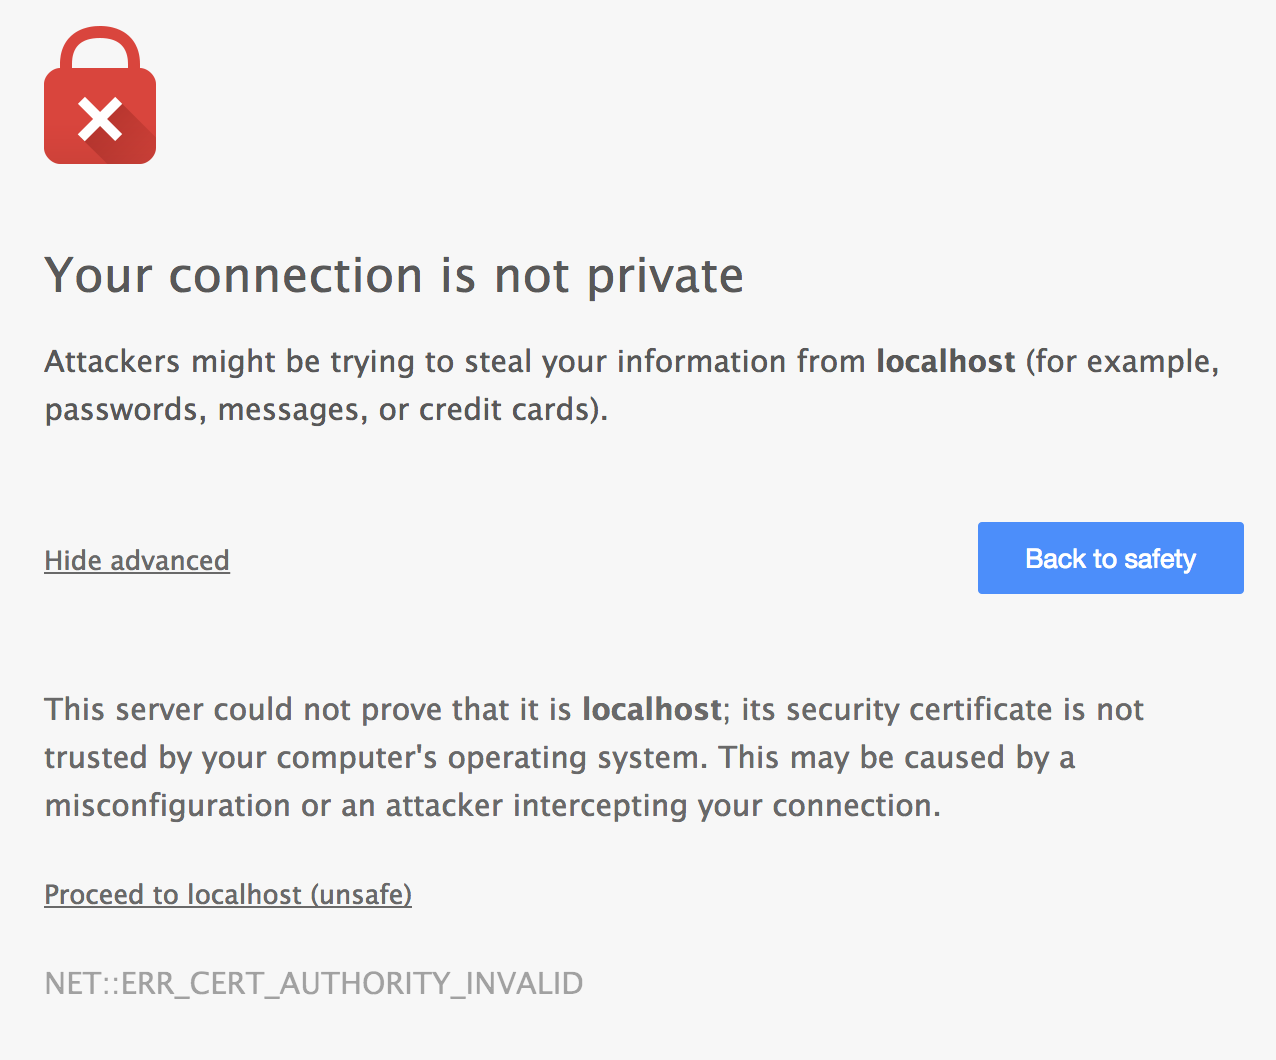 Your connection is not private. Ю Конекшен нот приват. Private от Google. Why your connection is not private.